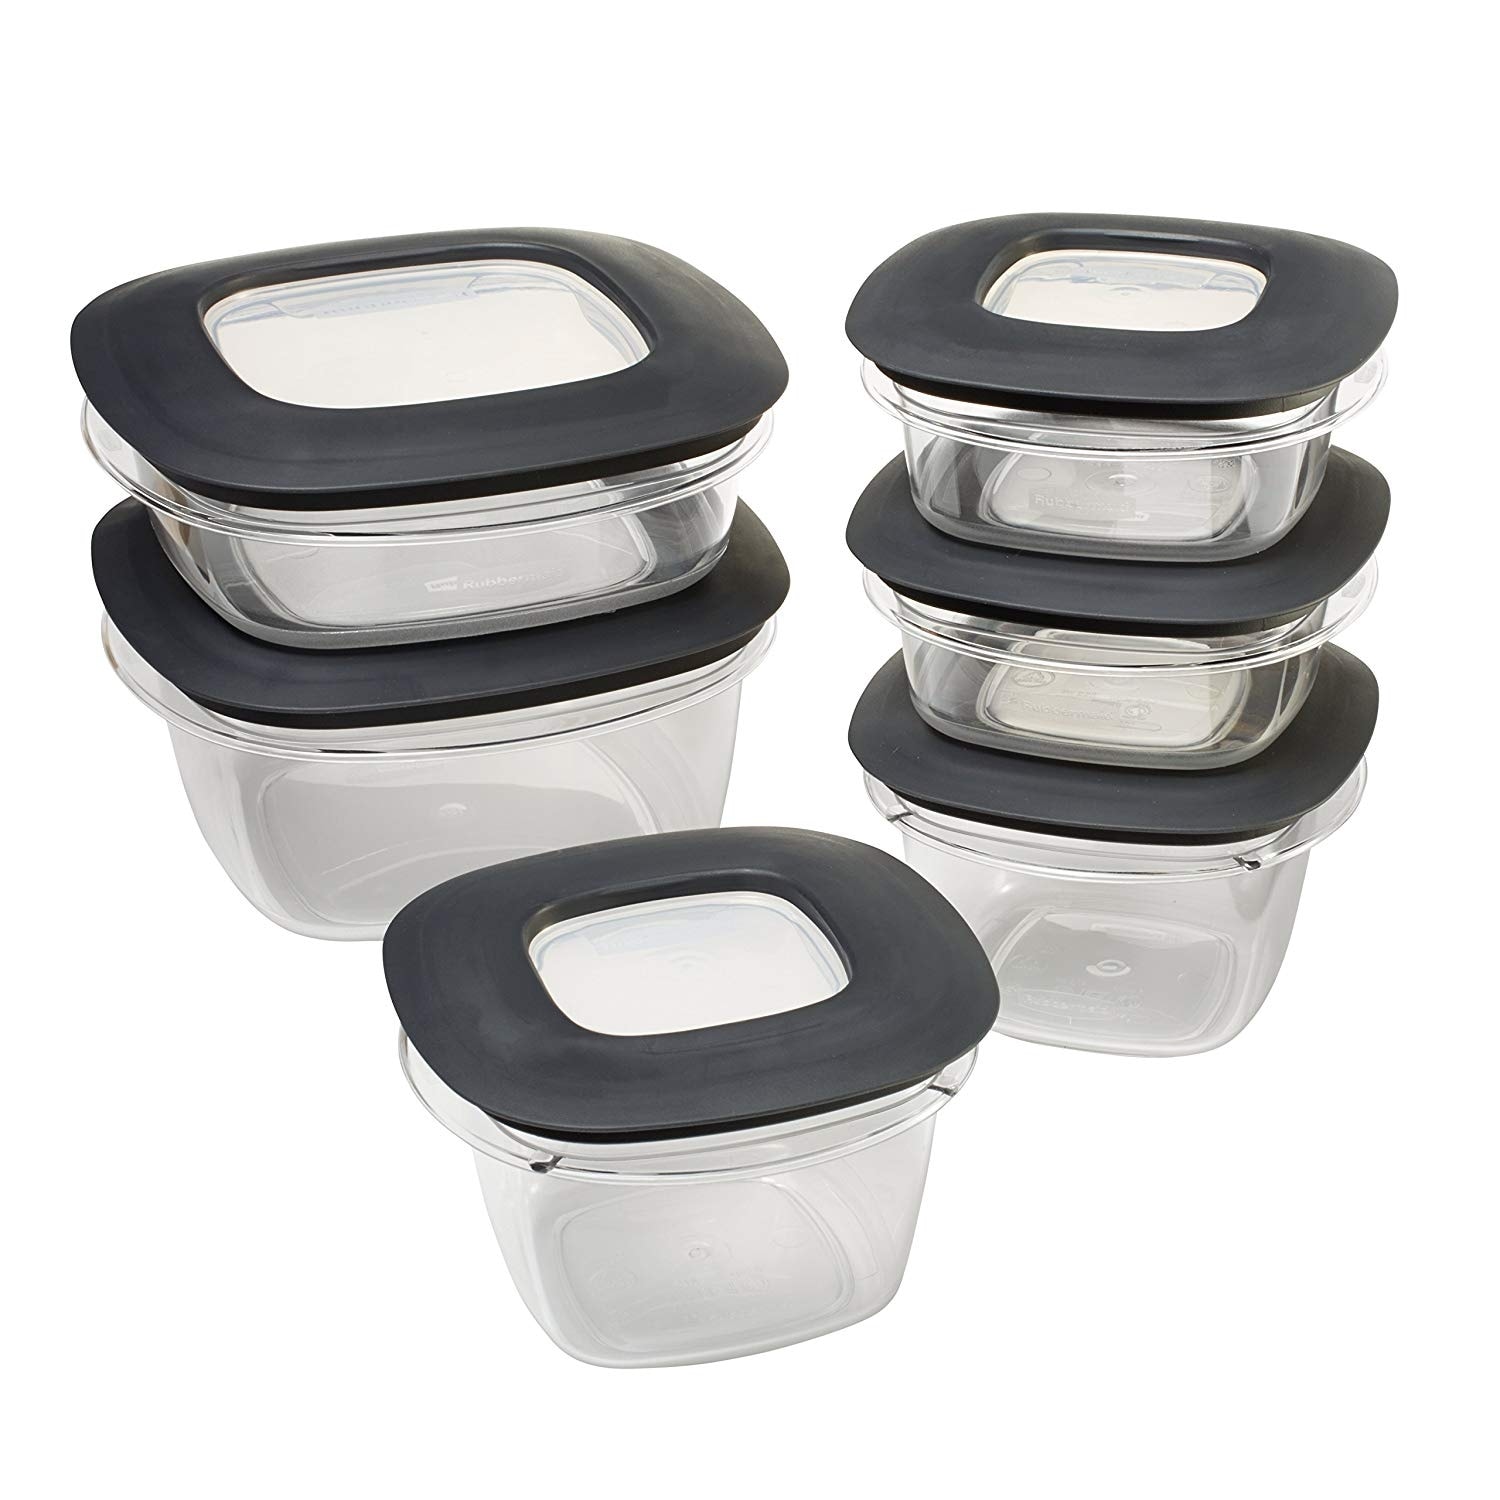 Rubbermaid 5 Cup Premier Food Storage Container Plastic Bases Grey